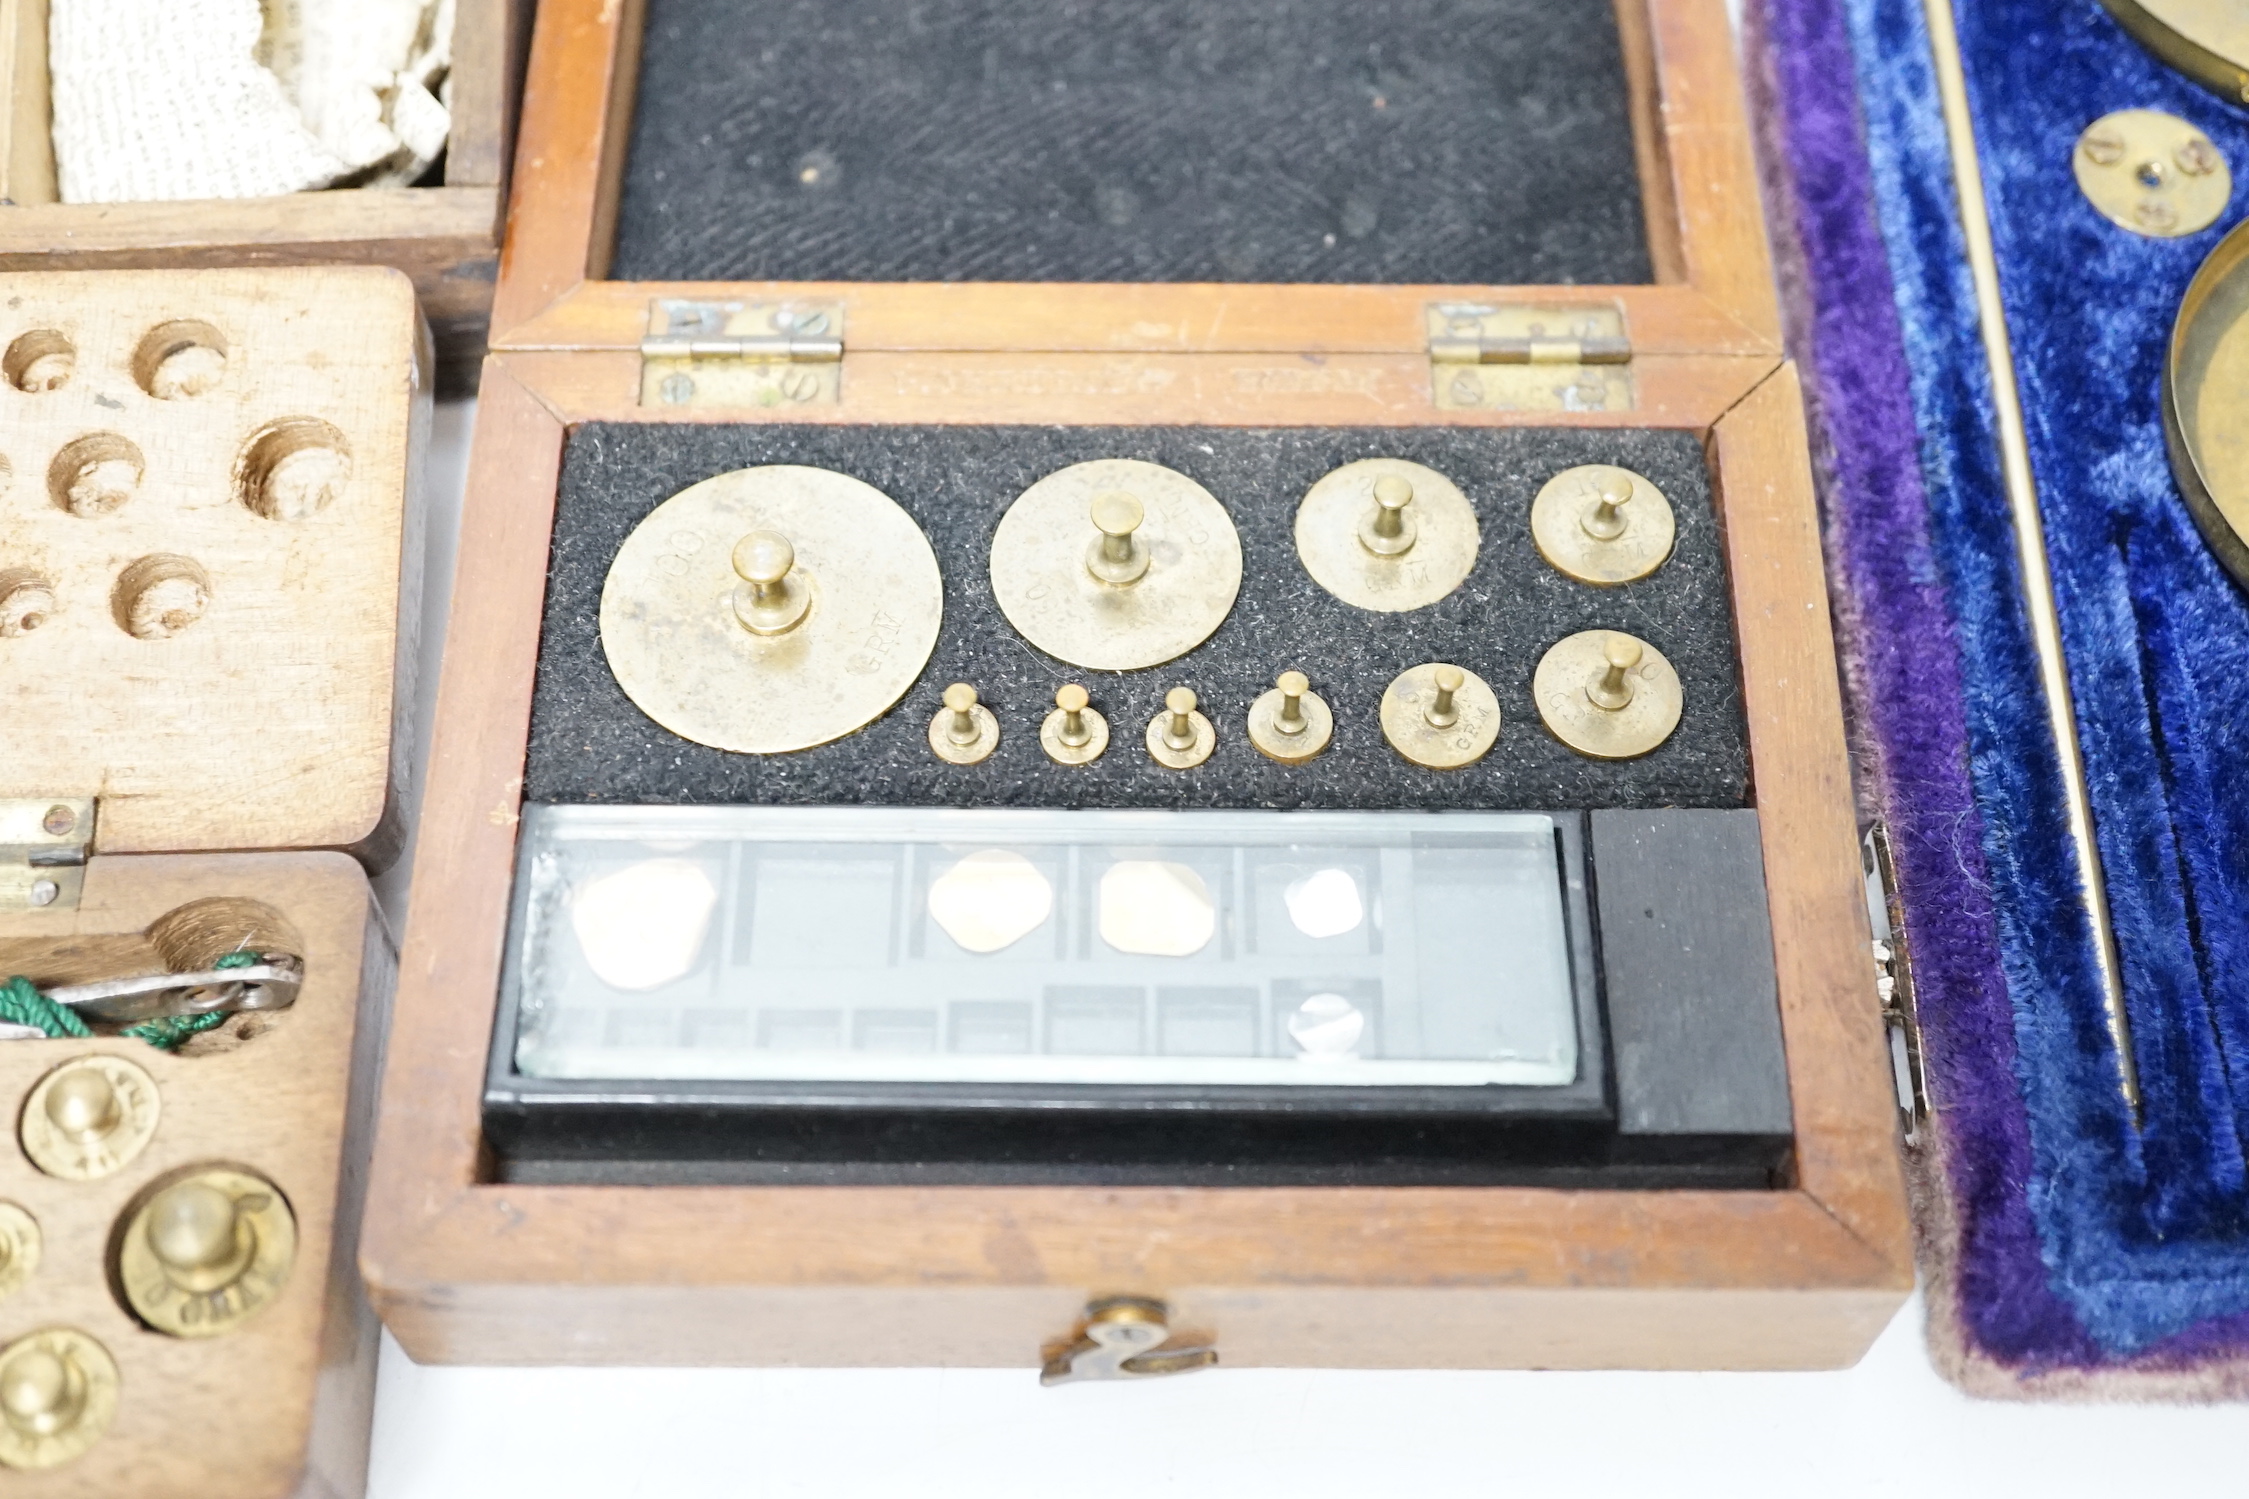 Four cased weighing sets, three of the sets with small scales included